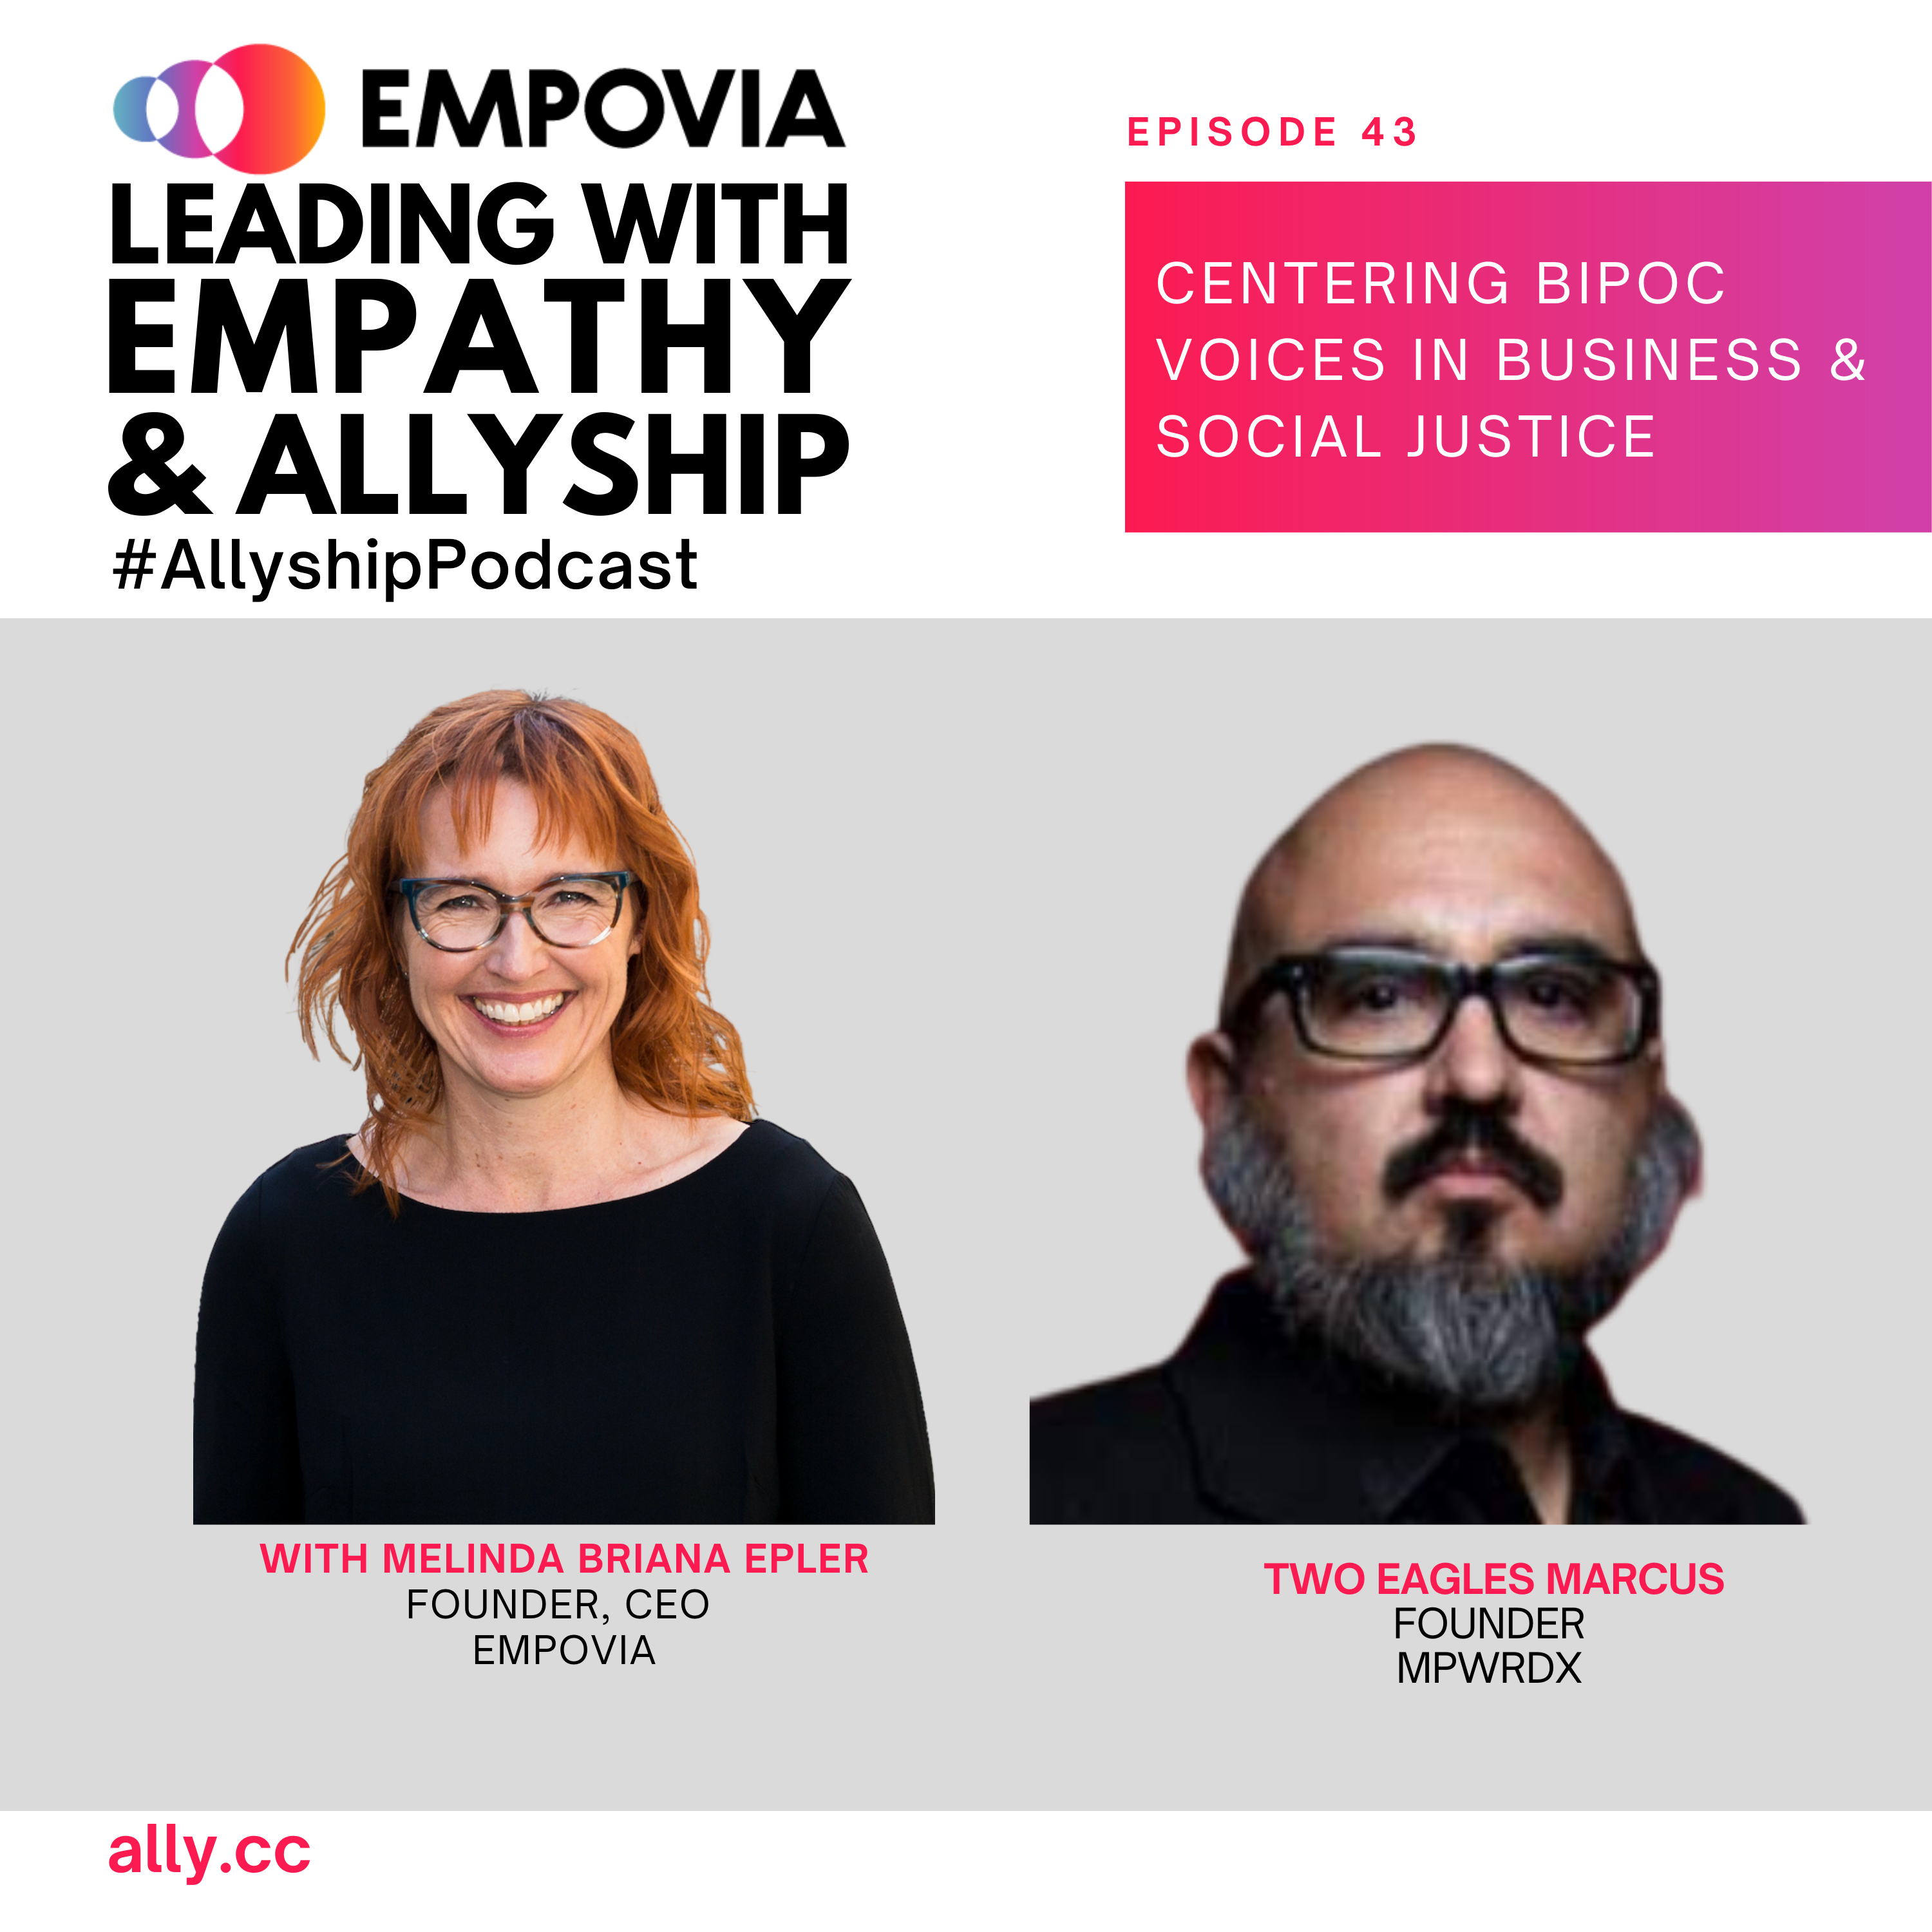 Leading With Empathy & Allyship promo with the Empovia logo and photos of host Melinda Briana Epler, a White woman with red hair and glasses, and Two Eagles Marcus, an Indigenous Native American man with glasses, black moustache, and salt-and-pepper beard.